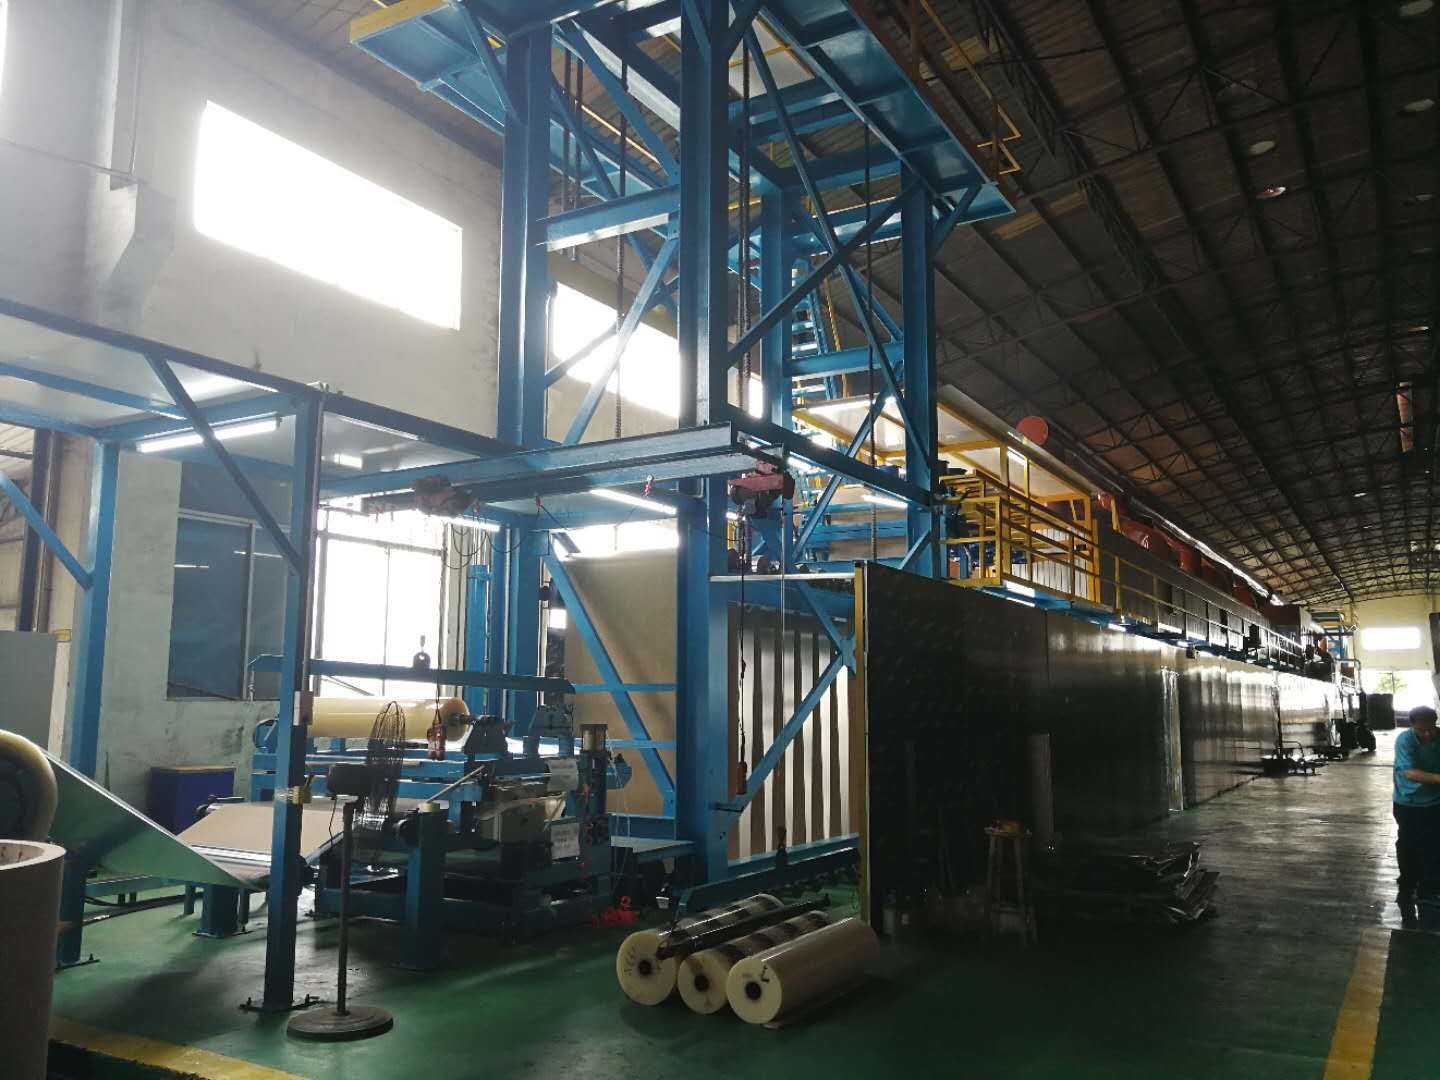 The new production line for color coated aluminum has set up